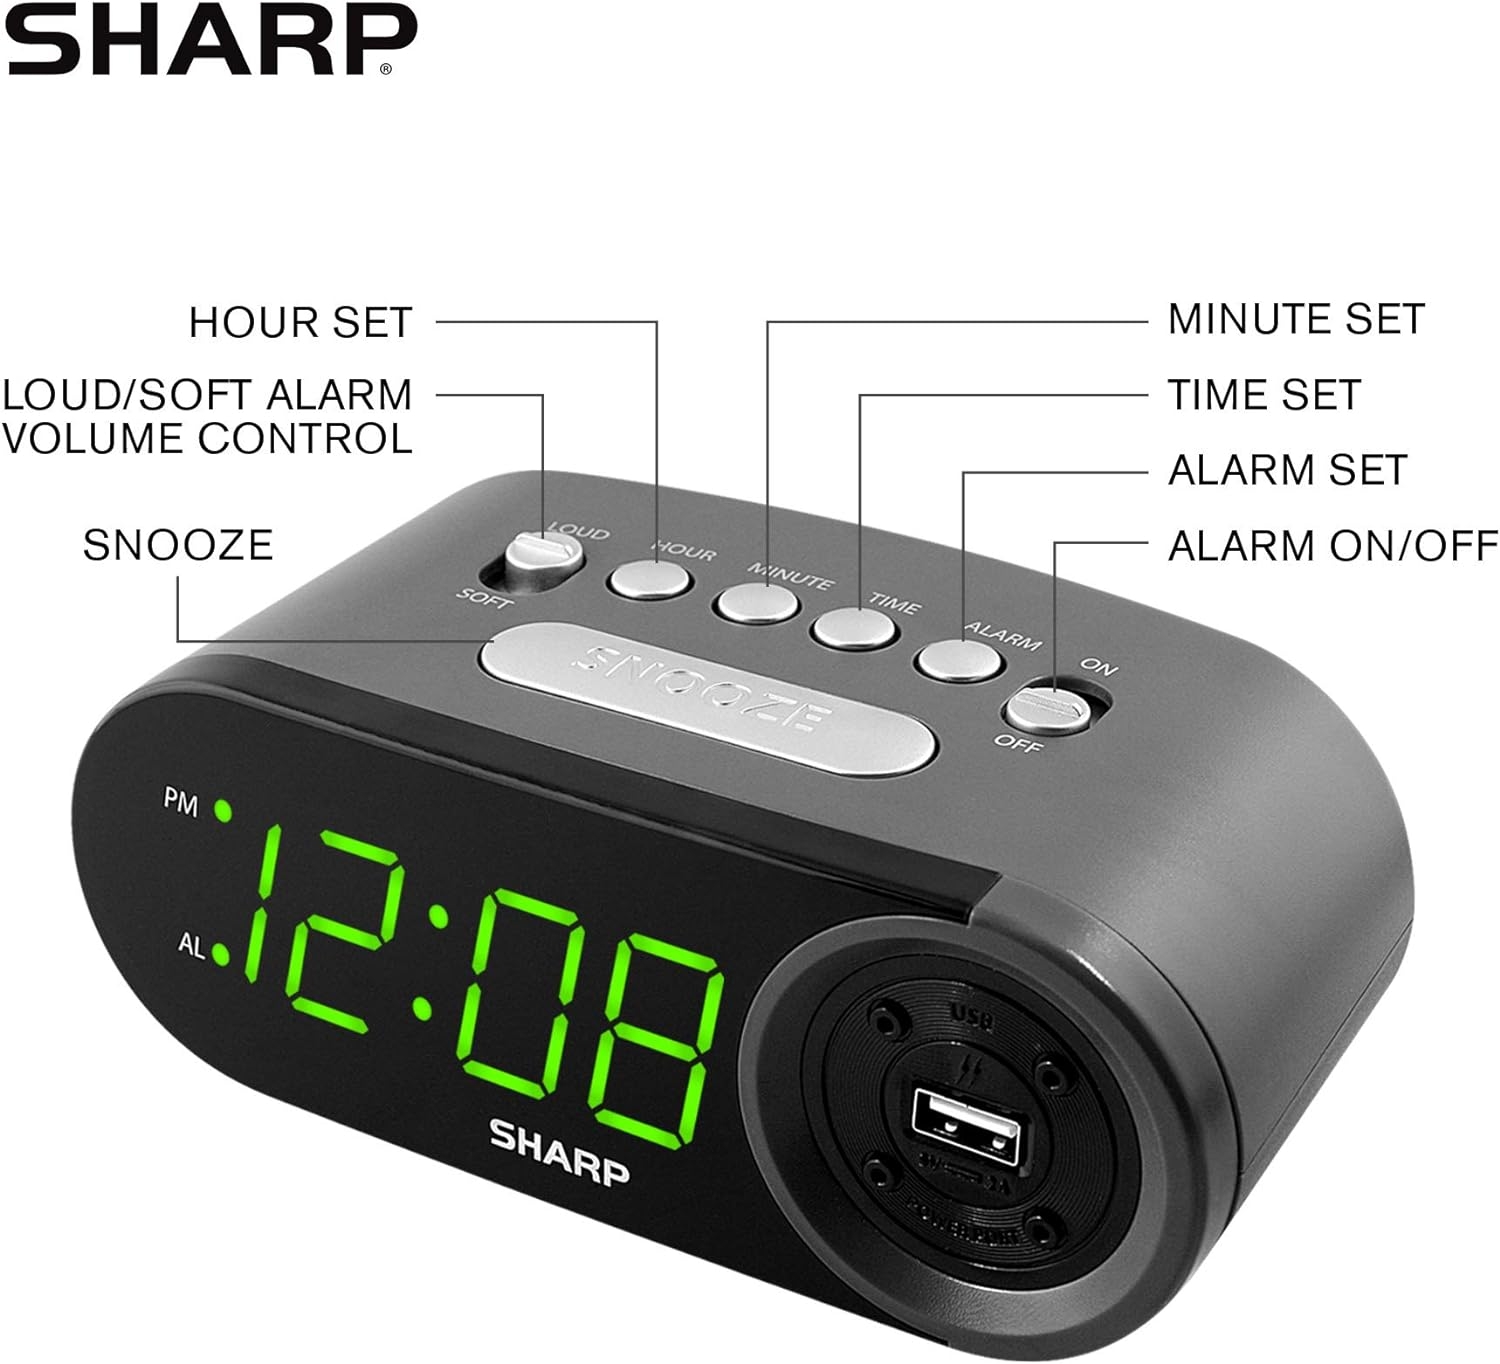 SHARP Digital Easy to Read Alarm Clock with 2 AMP High-Speed USB Charging Power Port - Charge Your Phone, Tablet with a high Speed Charge! Simple, Easy to Use Operation, Black – Green LEDs